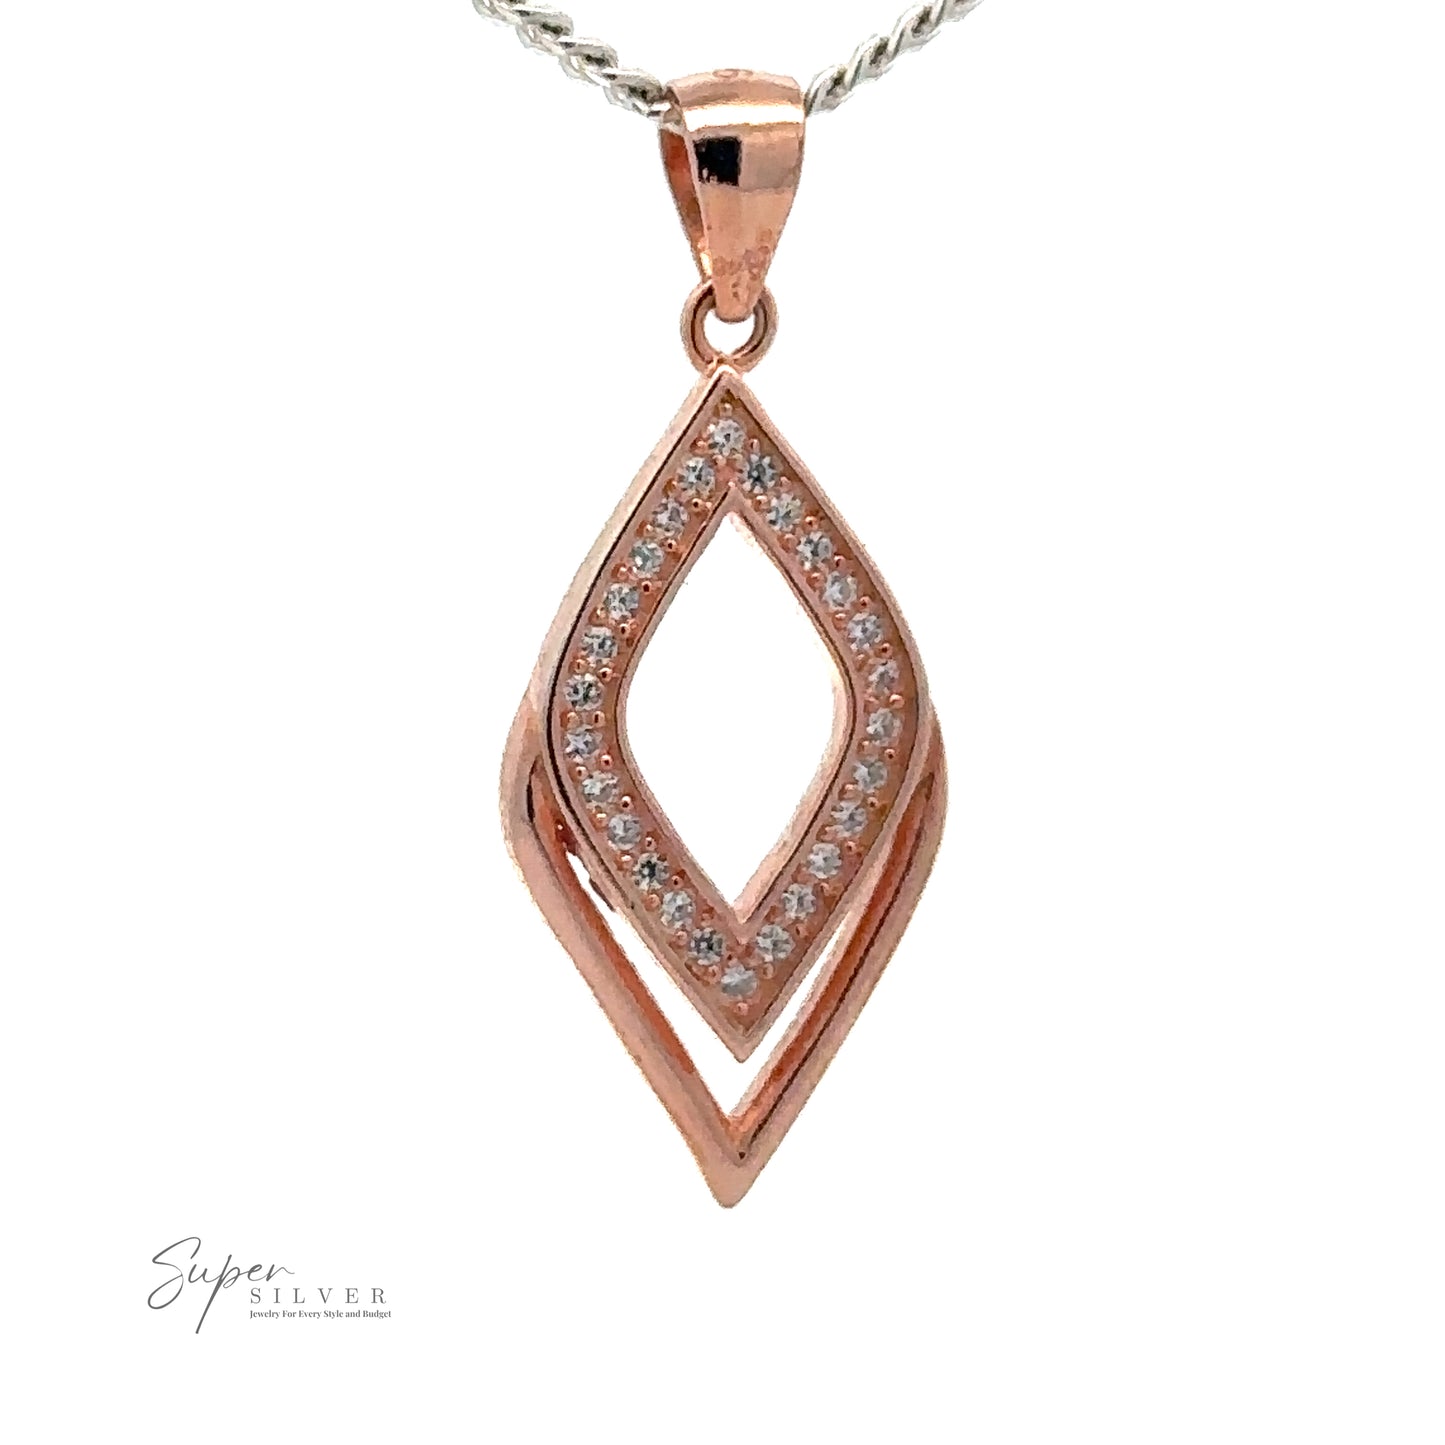 
                  
                    A Cubic Zirconia Leaf Shape Pendant, with a rose gold leaf-shaped design and encrusted geometric details, hanging from a twisted chain. The "Super Silver" brand logo is visible in the bottom left corner.
                  
                